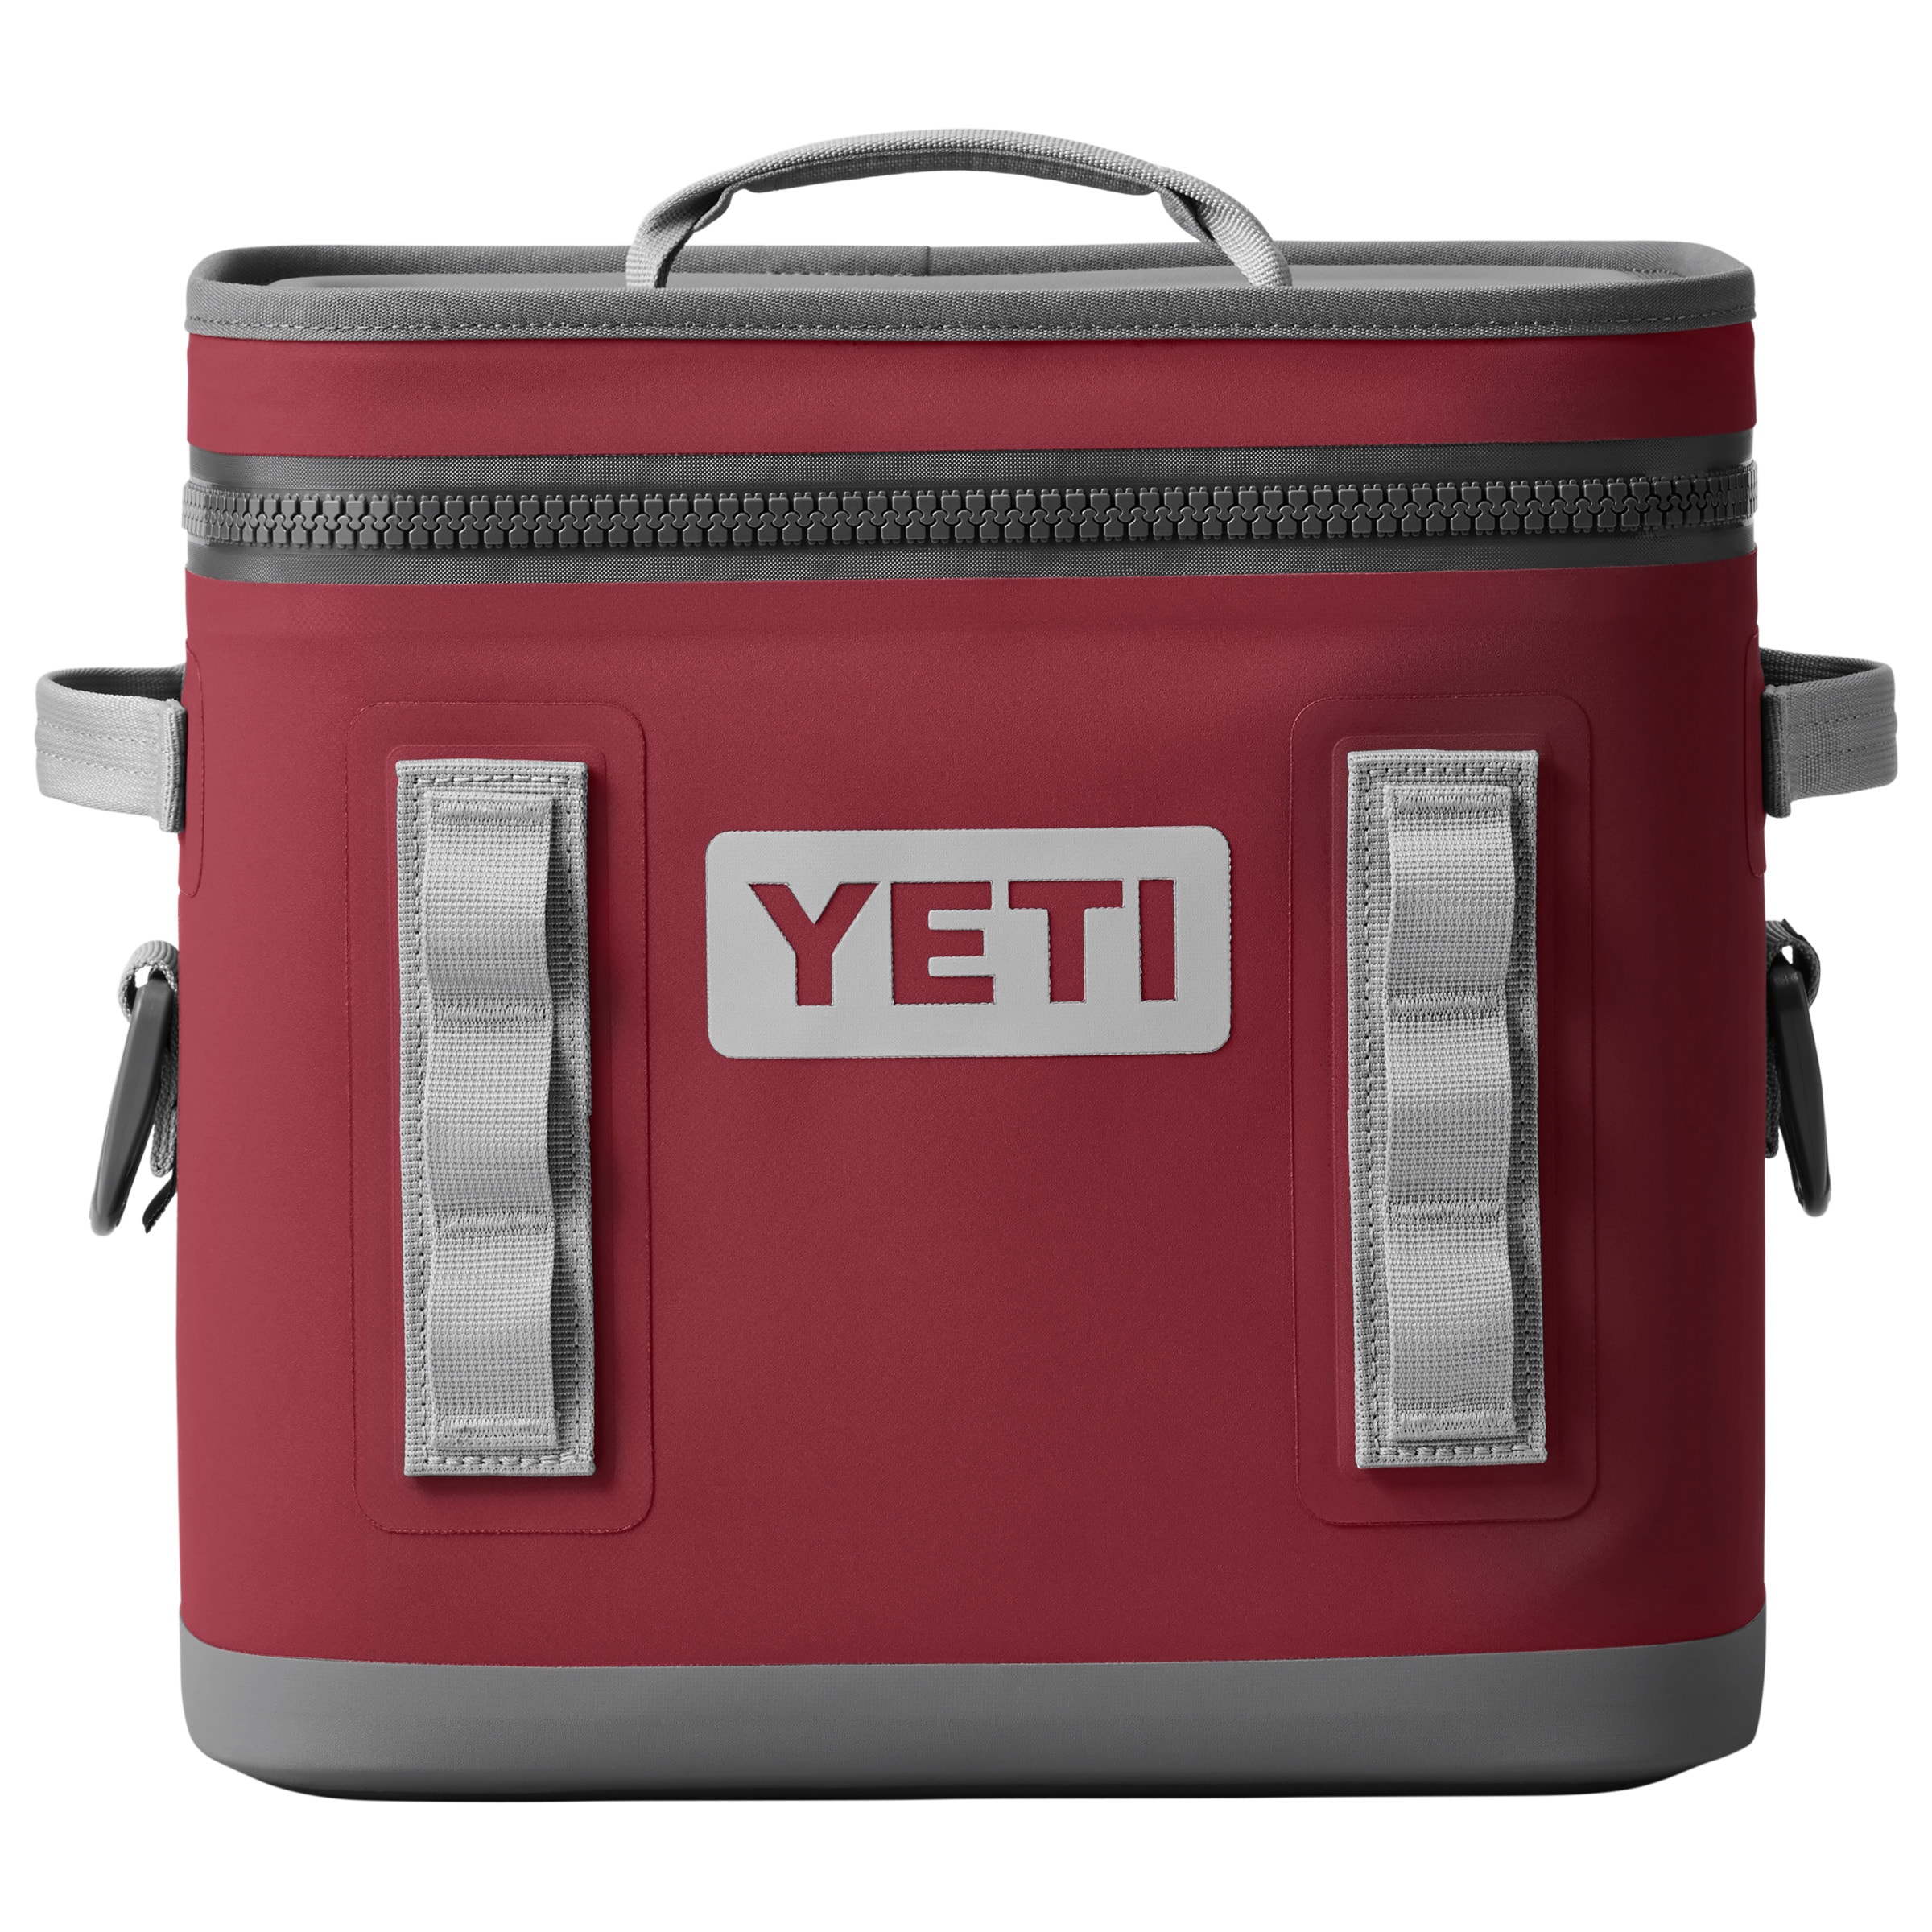 Meta-Cooler: YETI Patents Auto-Venting Food Jug to Hold Multiple Meals